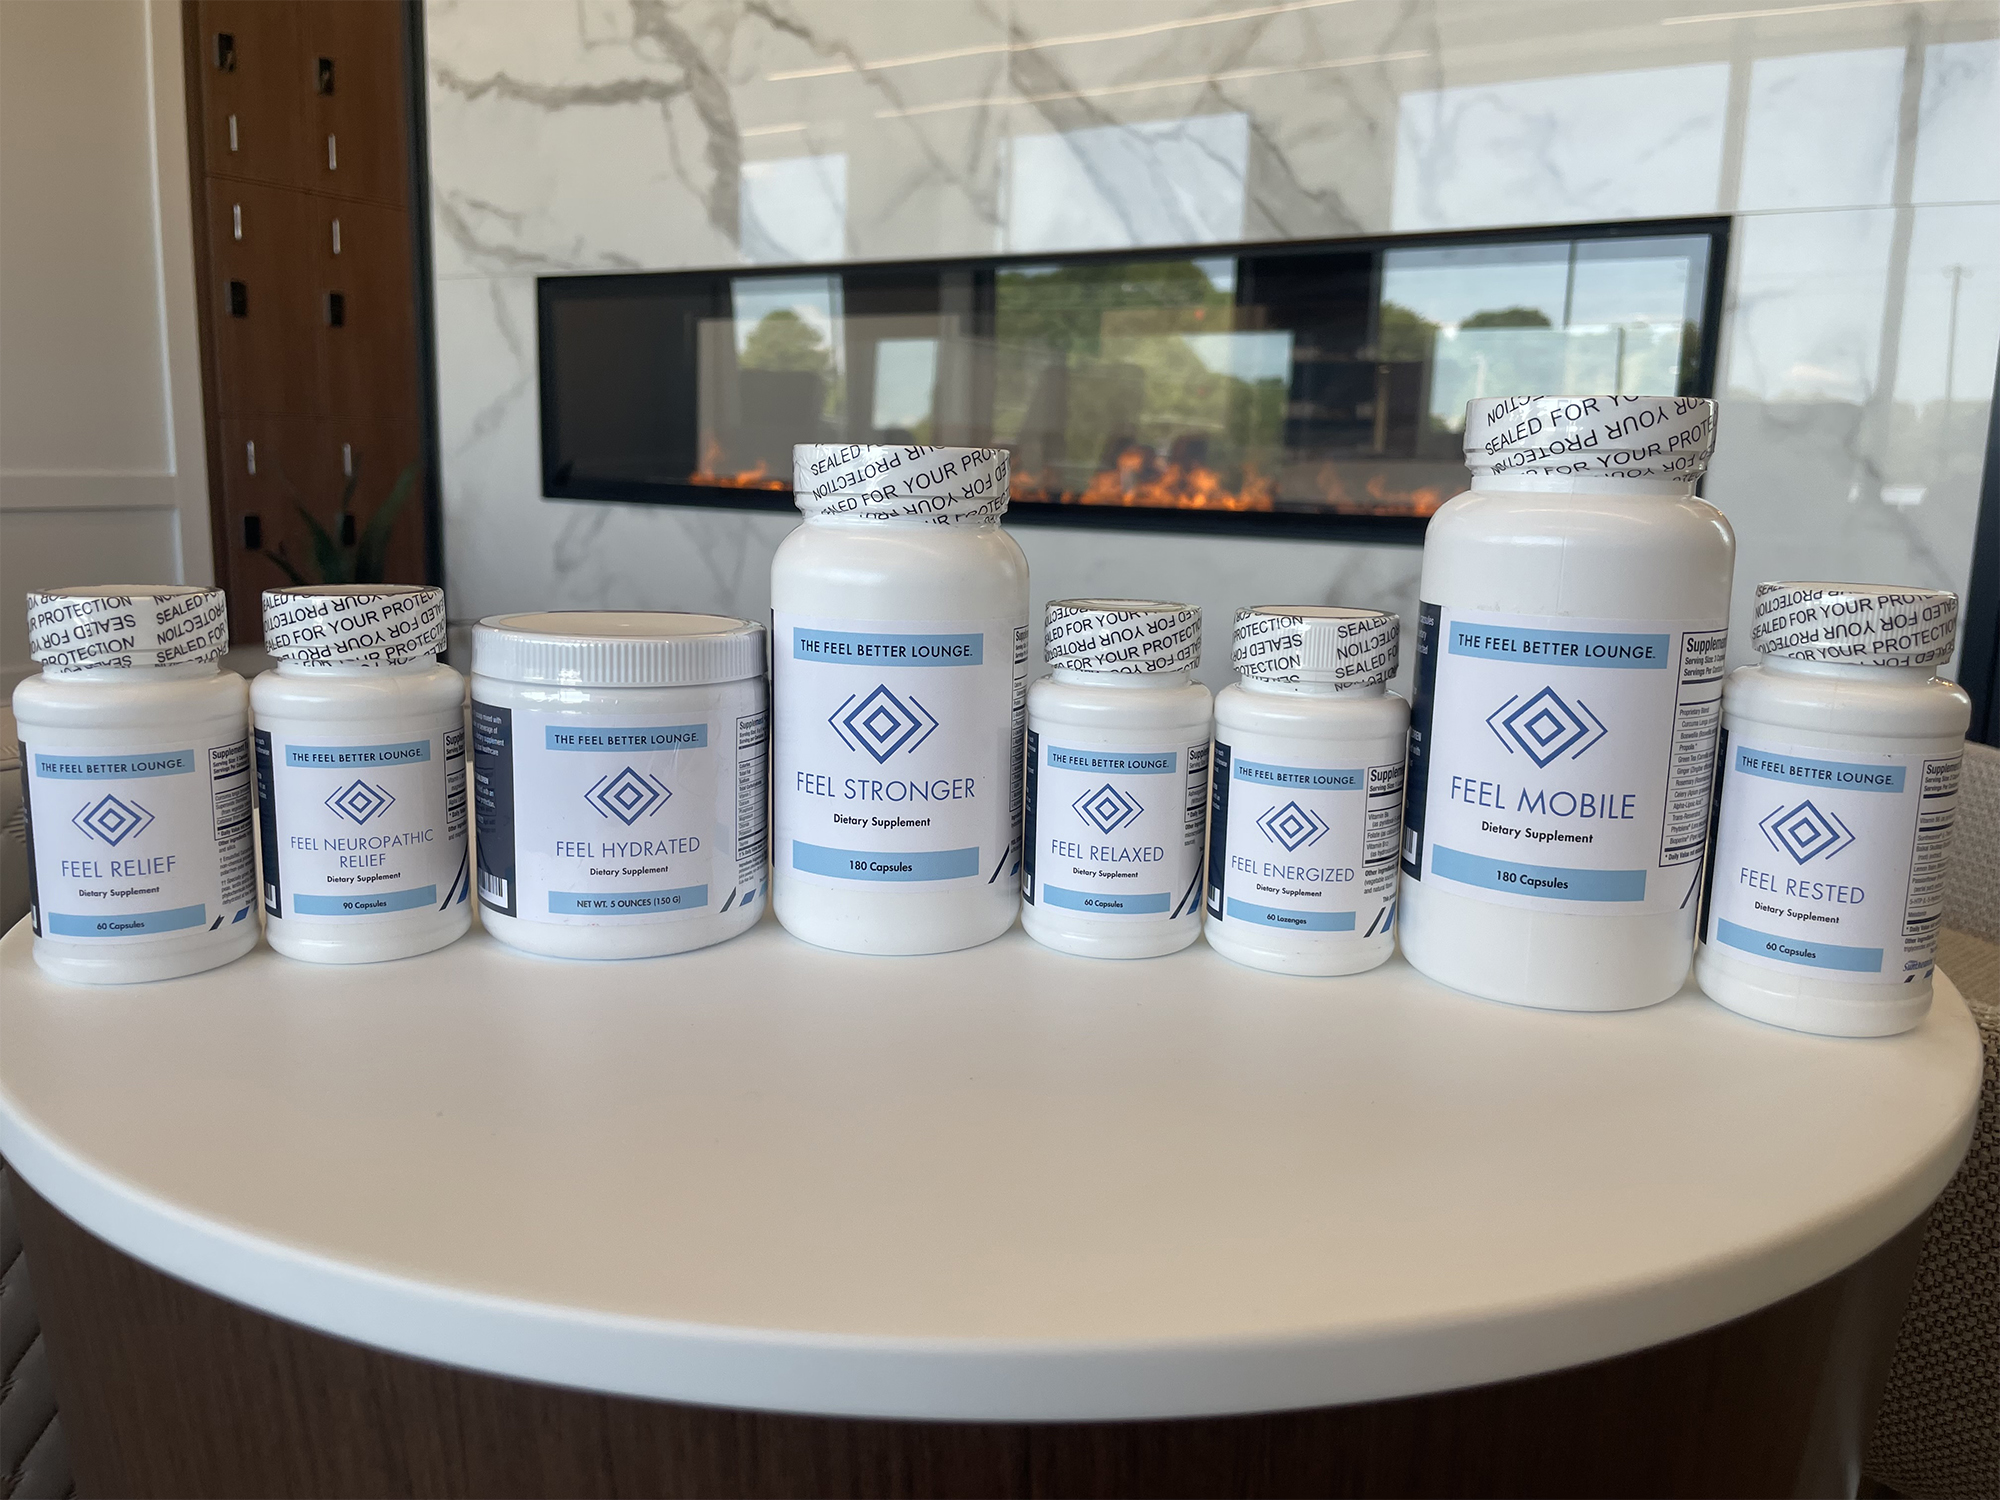 Supplements at The Feel Better Lounge